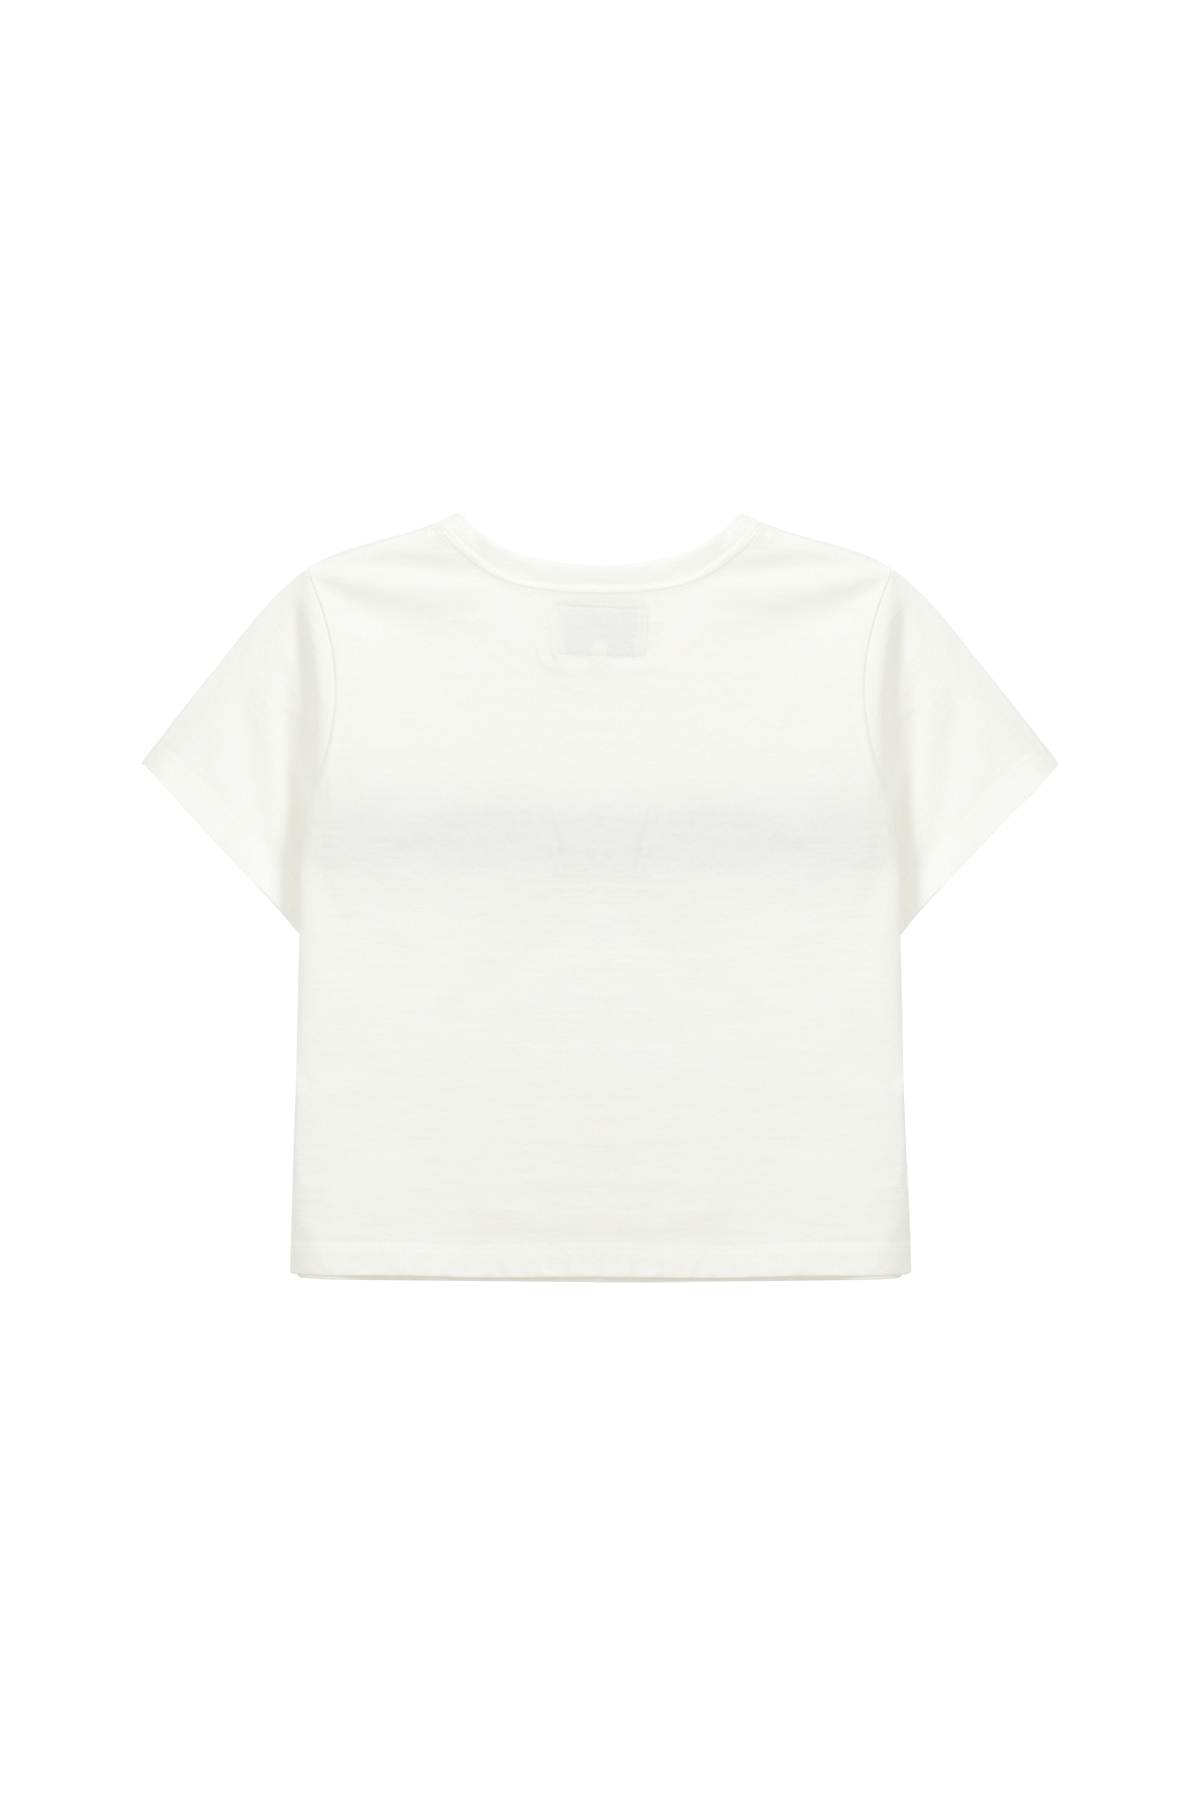 [EXCLUSIVE] LOGO CUTTED CROP TOP IN WHITE